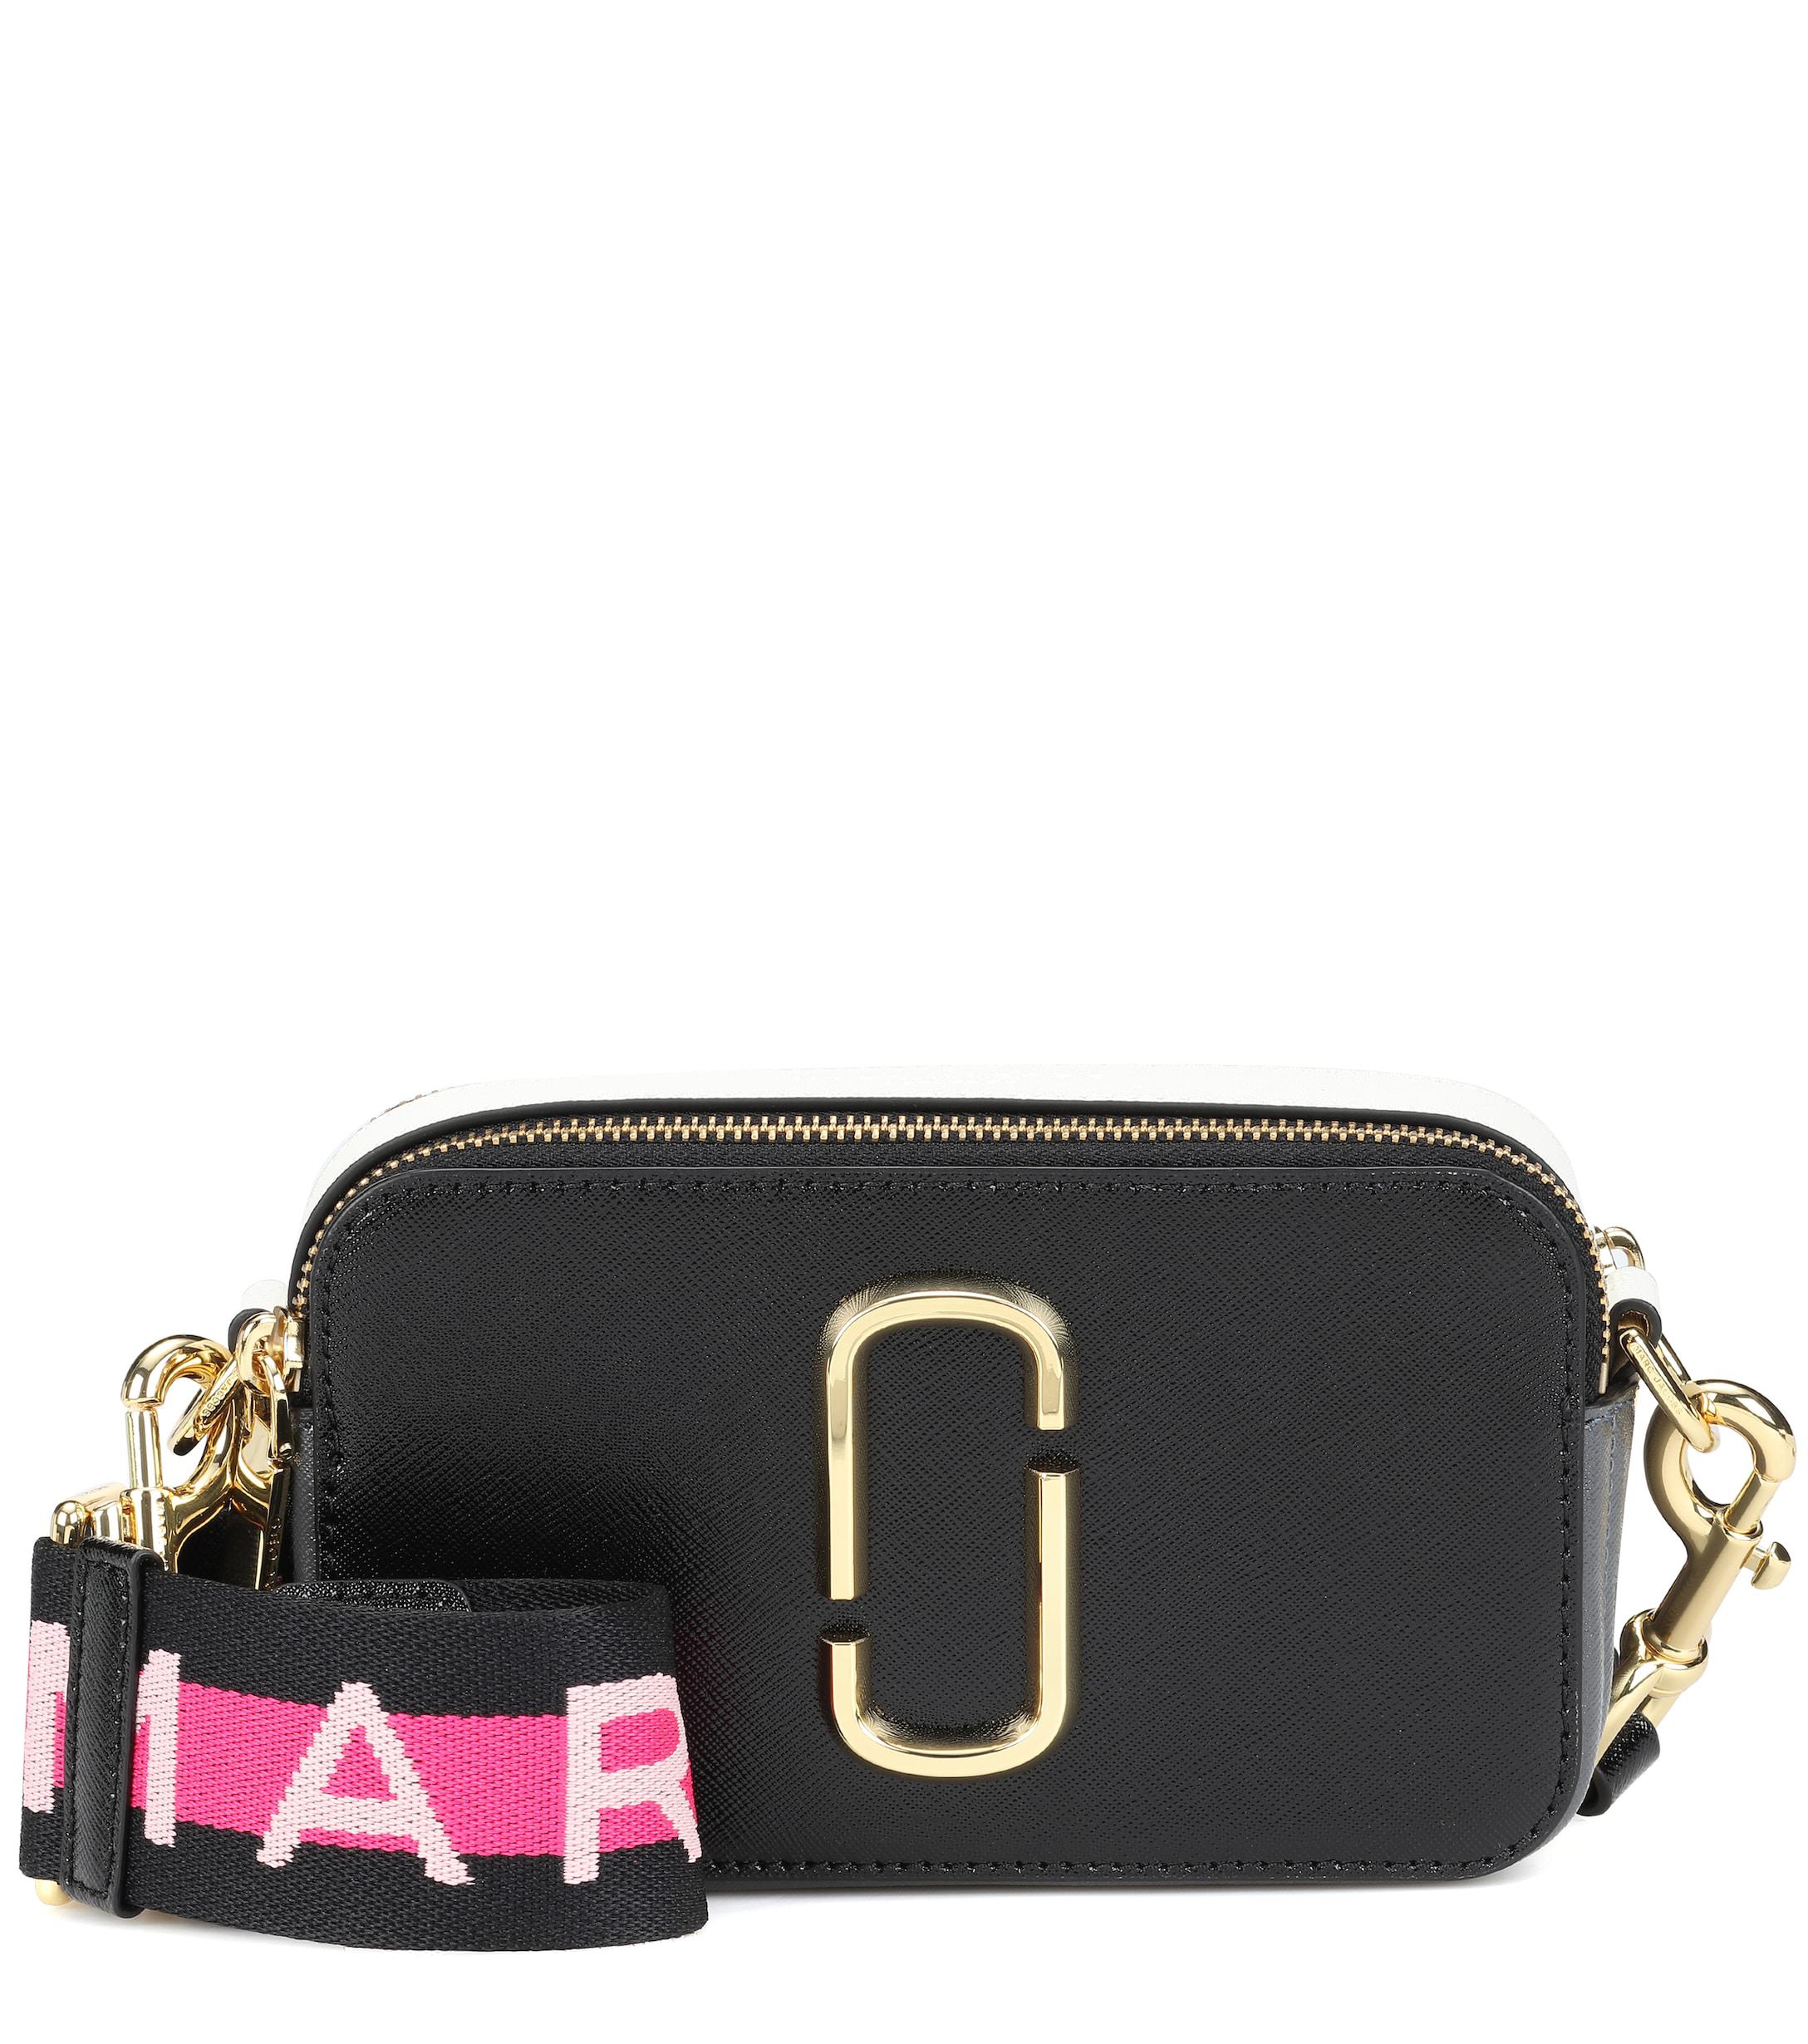 Lyst - Marc Jacobs Snapshot Small Leather Camera Bag in Black